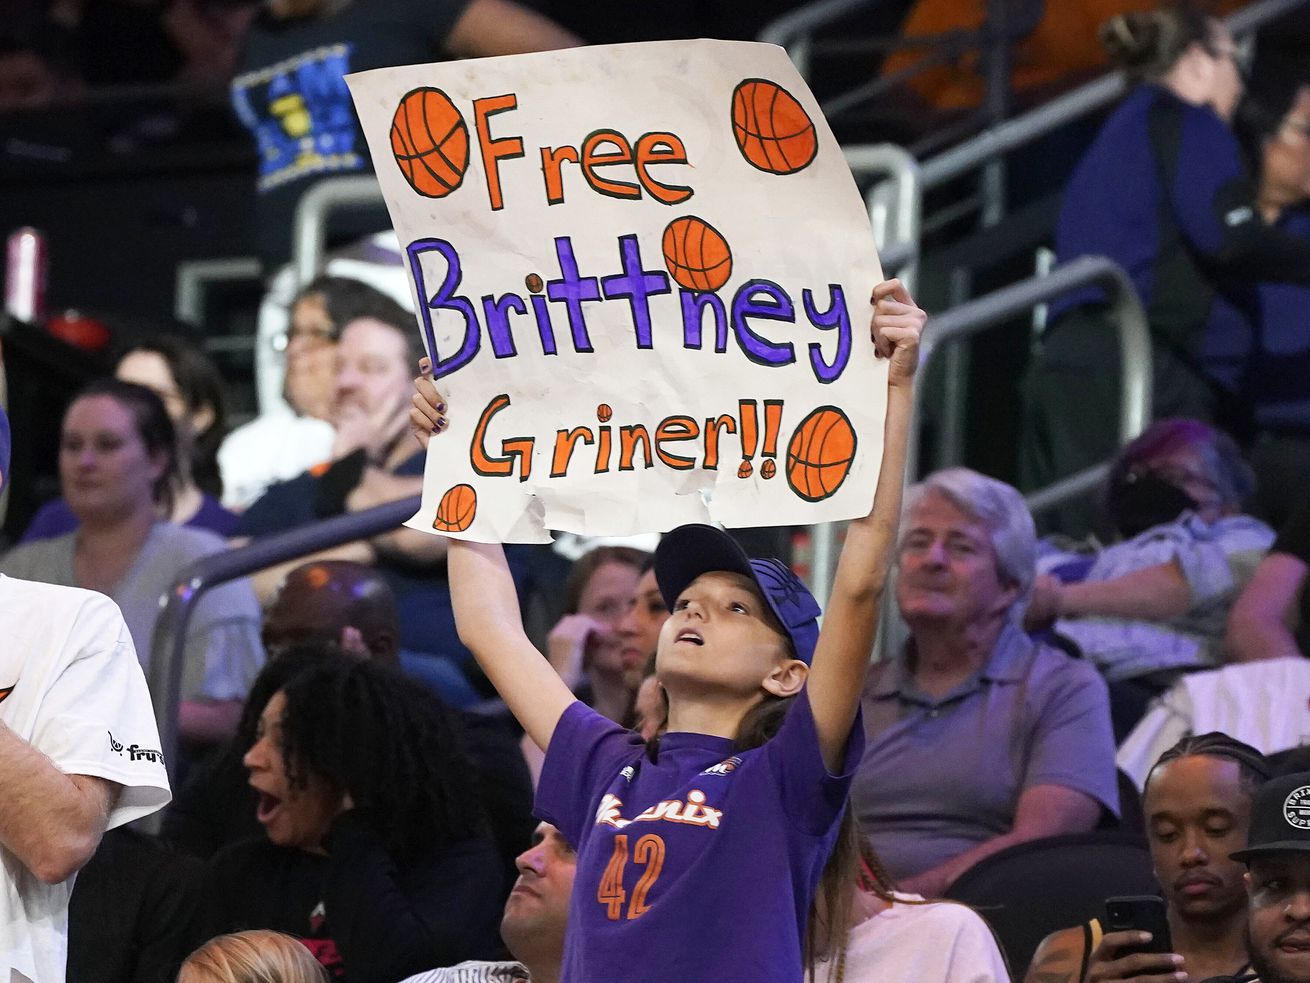 Brittney Griner’s detention in Russia, briefly explained